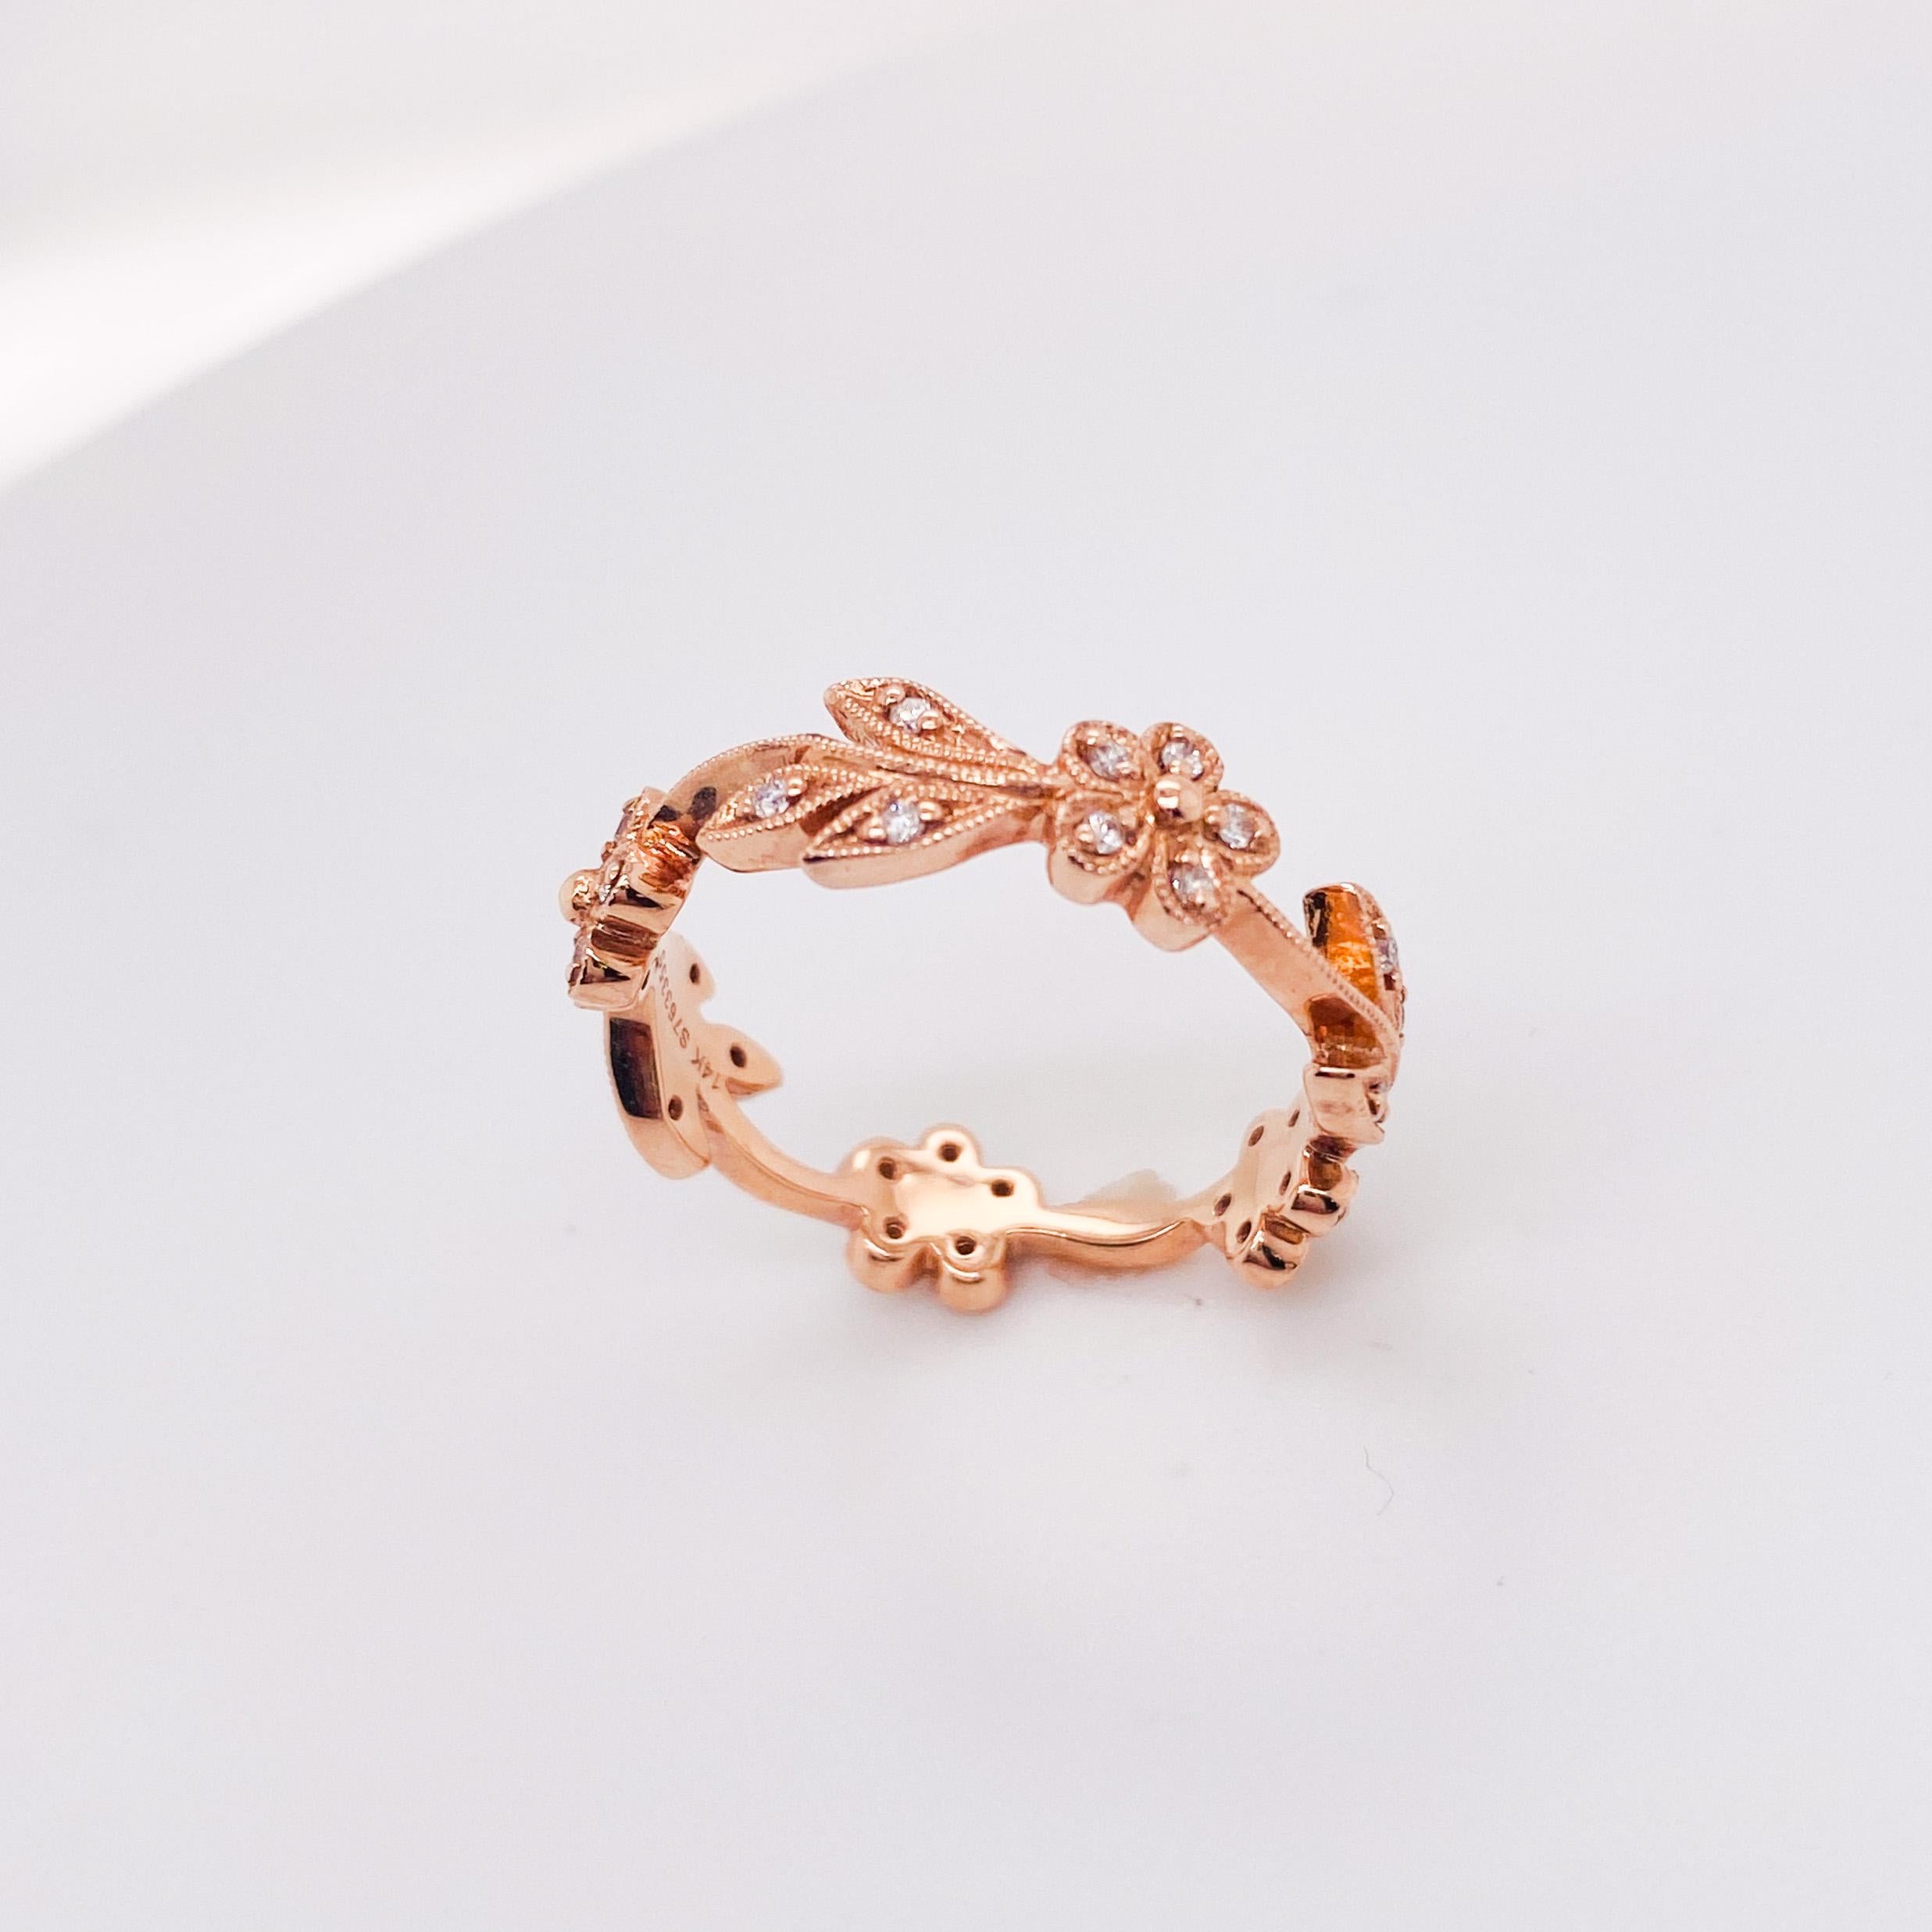 Contemporary Flower Diamond Band in Rose Gold W 25 Diamonds in a Floral Design SZ 6.5 sizable For Sale